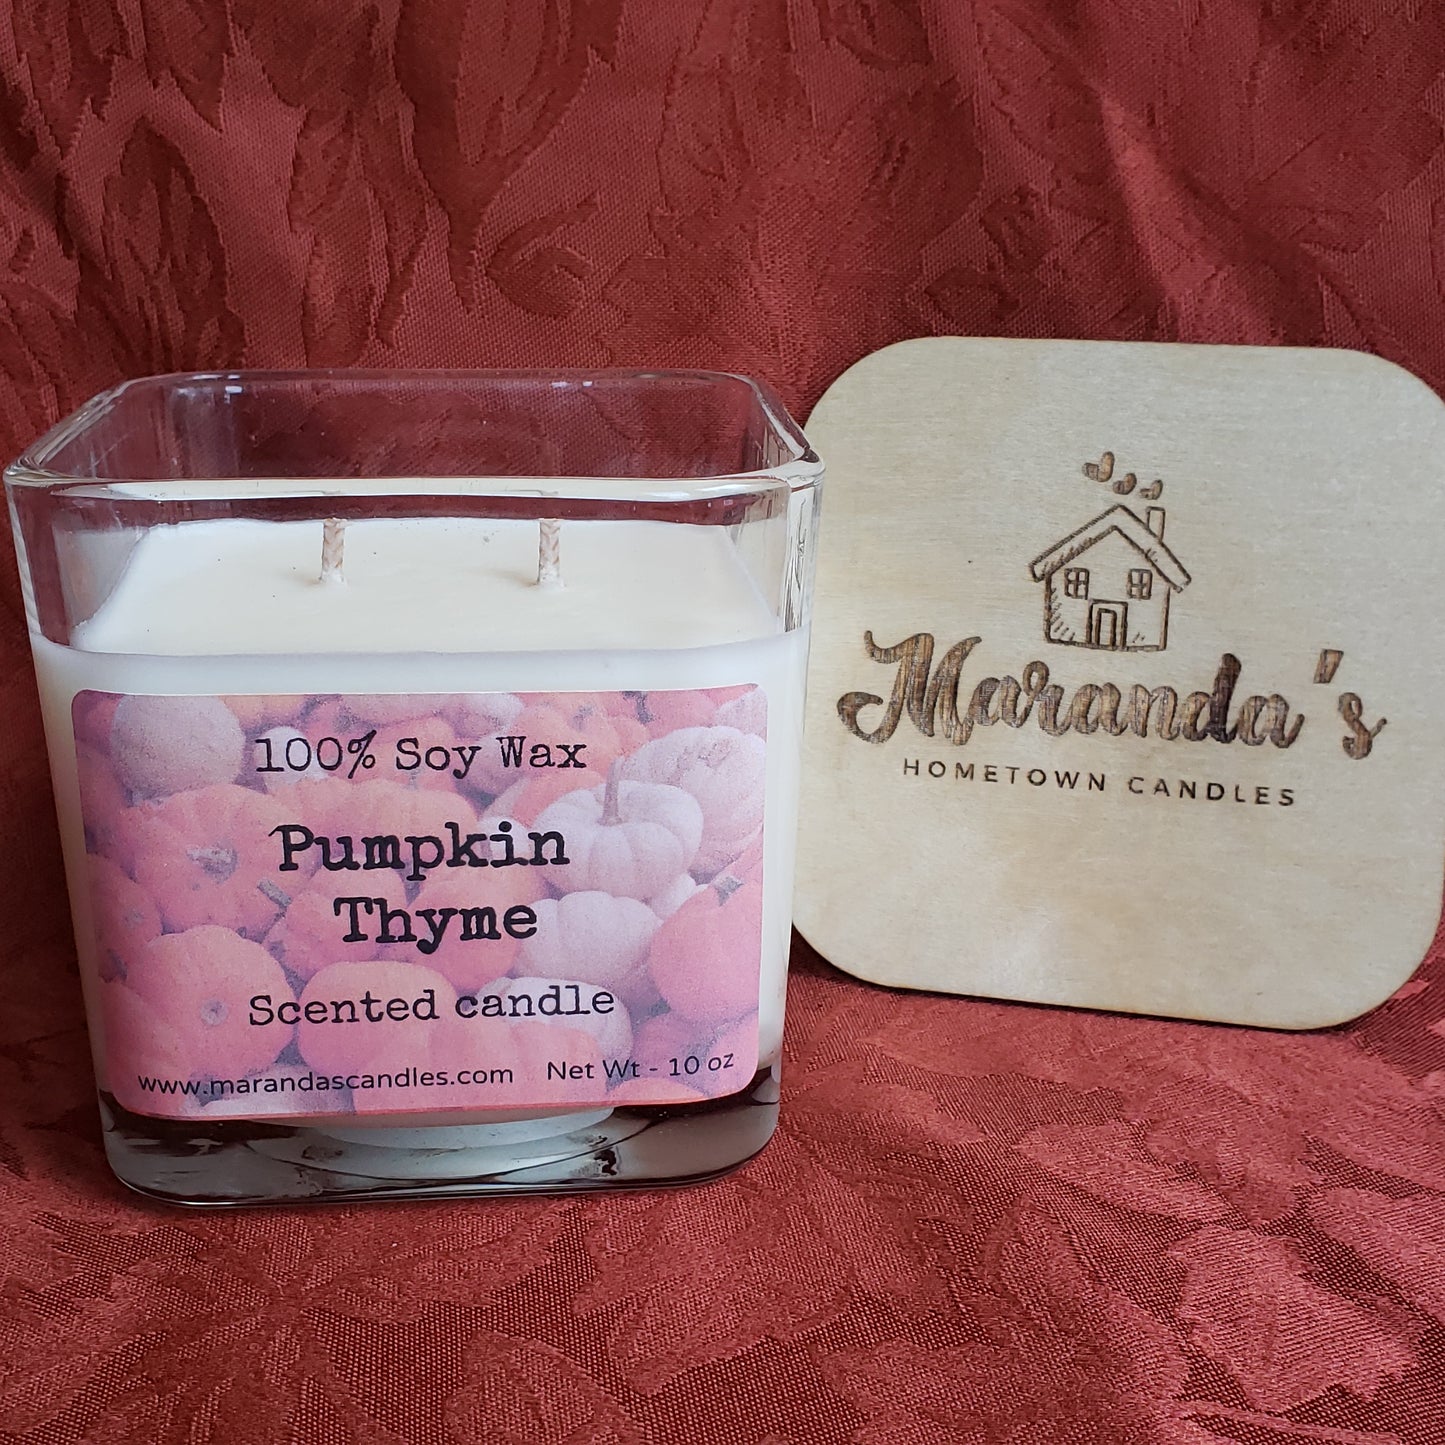 Pumpkin Thyme Scented Soy Wax Candle/Wax melts